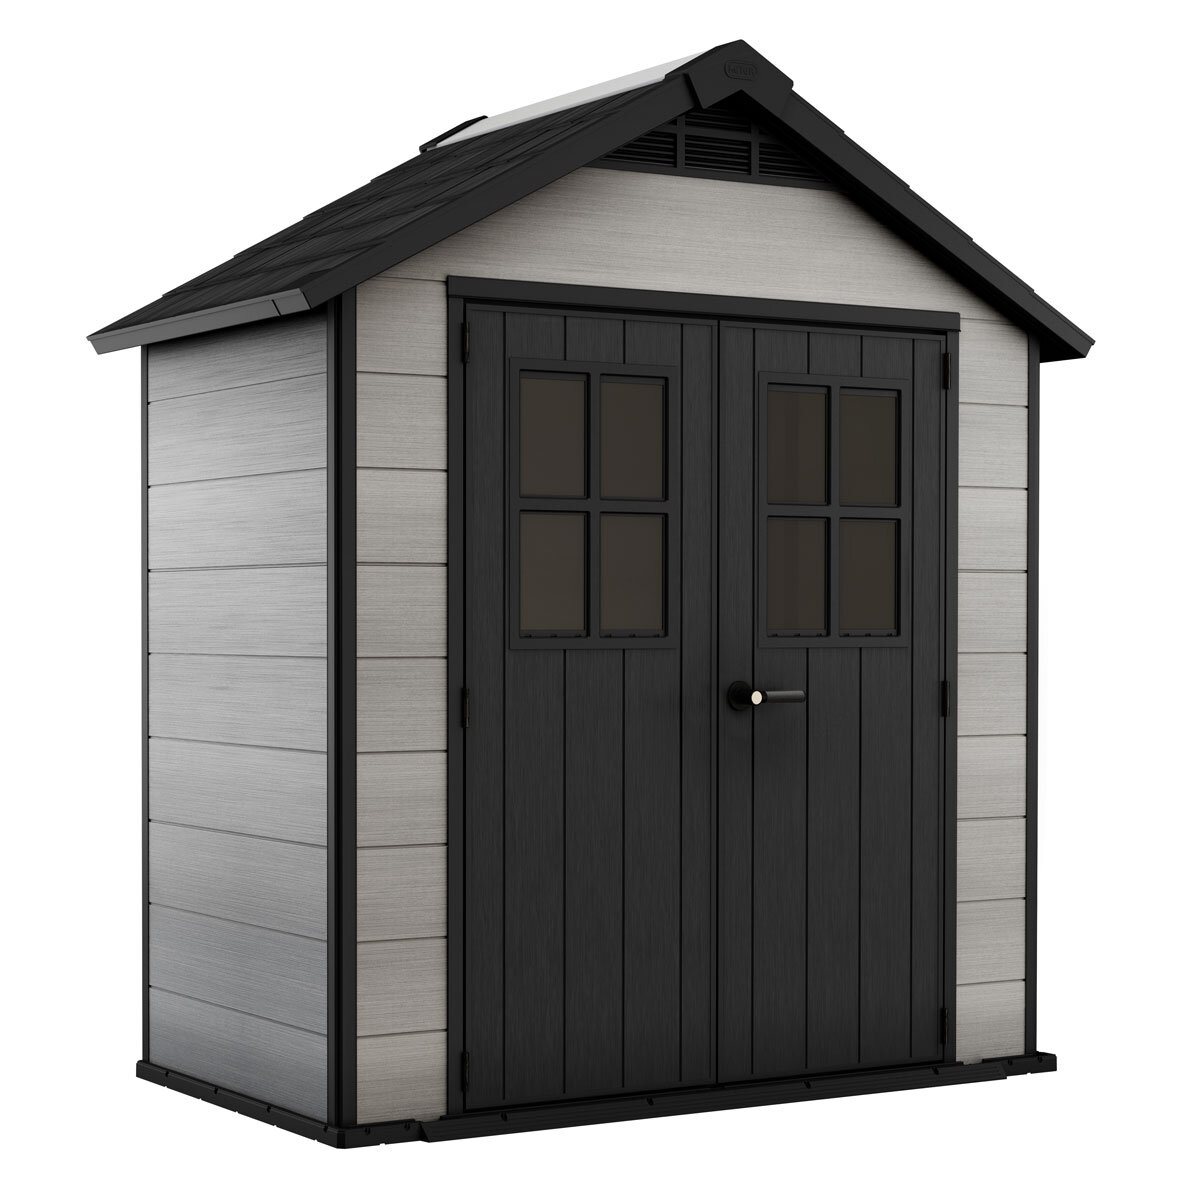 Keter Oakland 7ft 5" x 3ft 3" (2.2 x 1.2m) Storage Shed